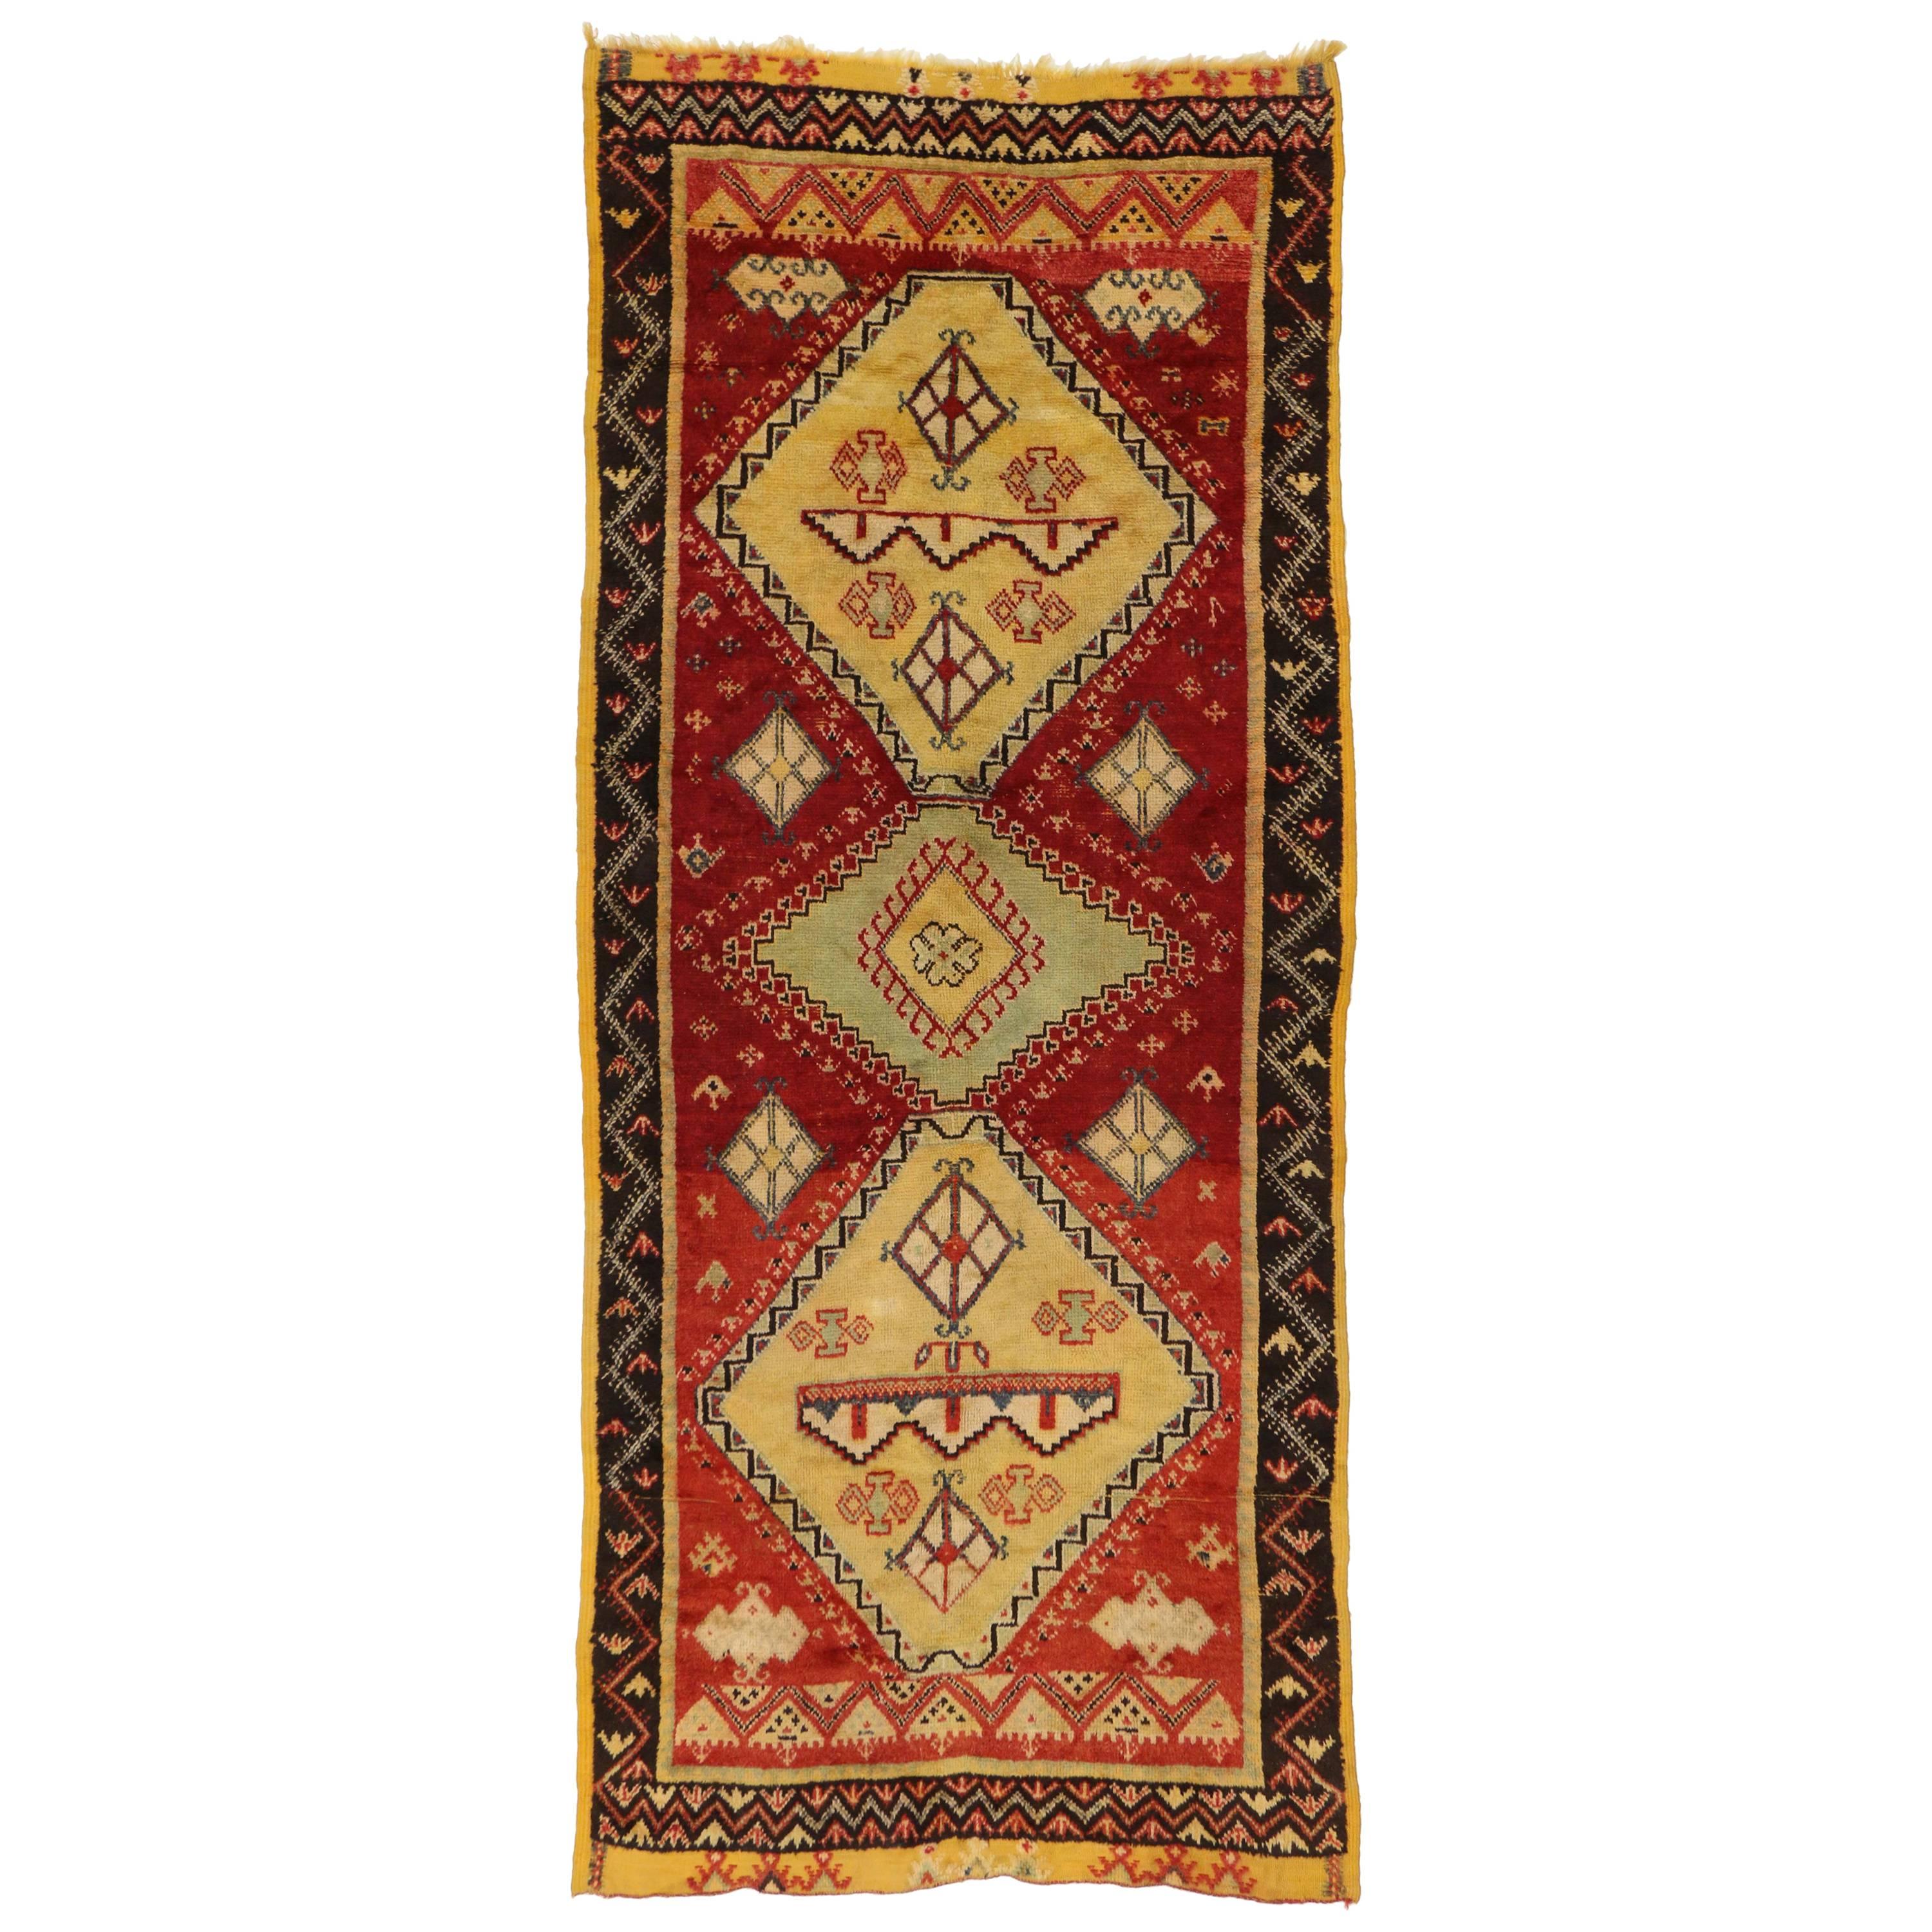 Vintage Berber Moroccan Rug with Modern Tribal Style